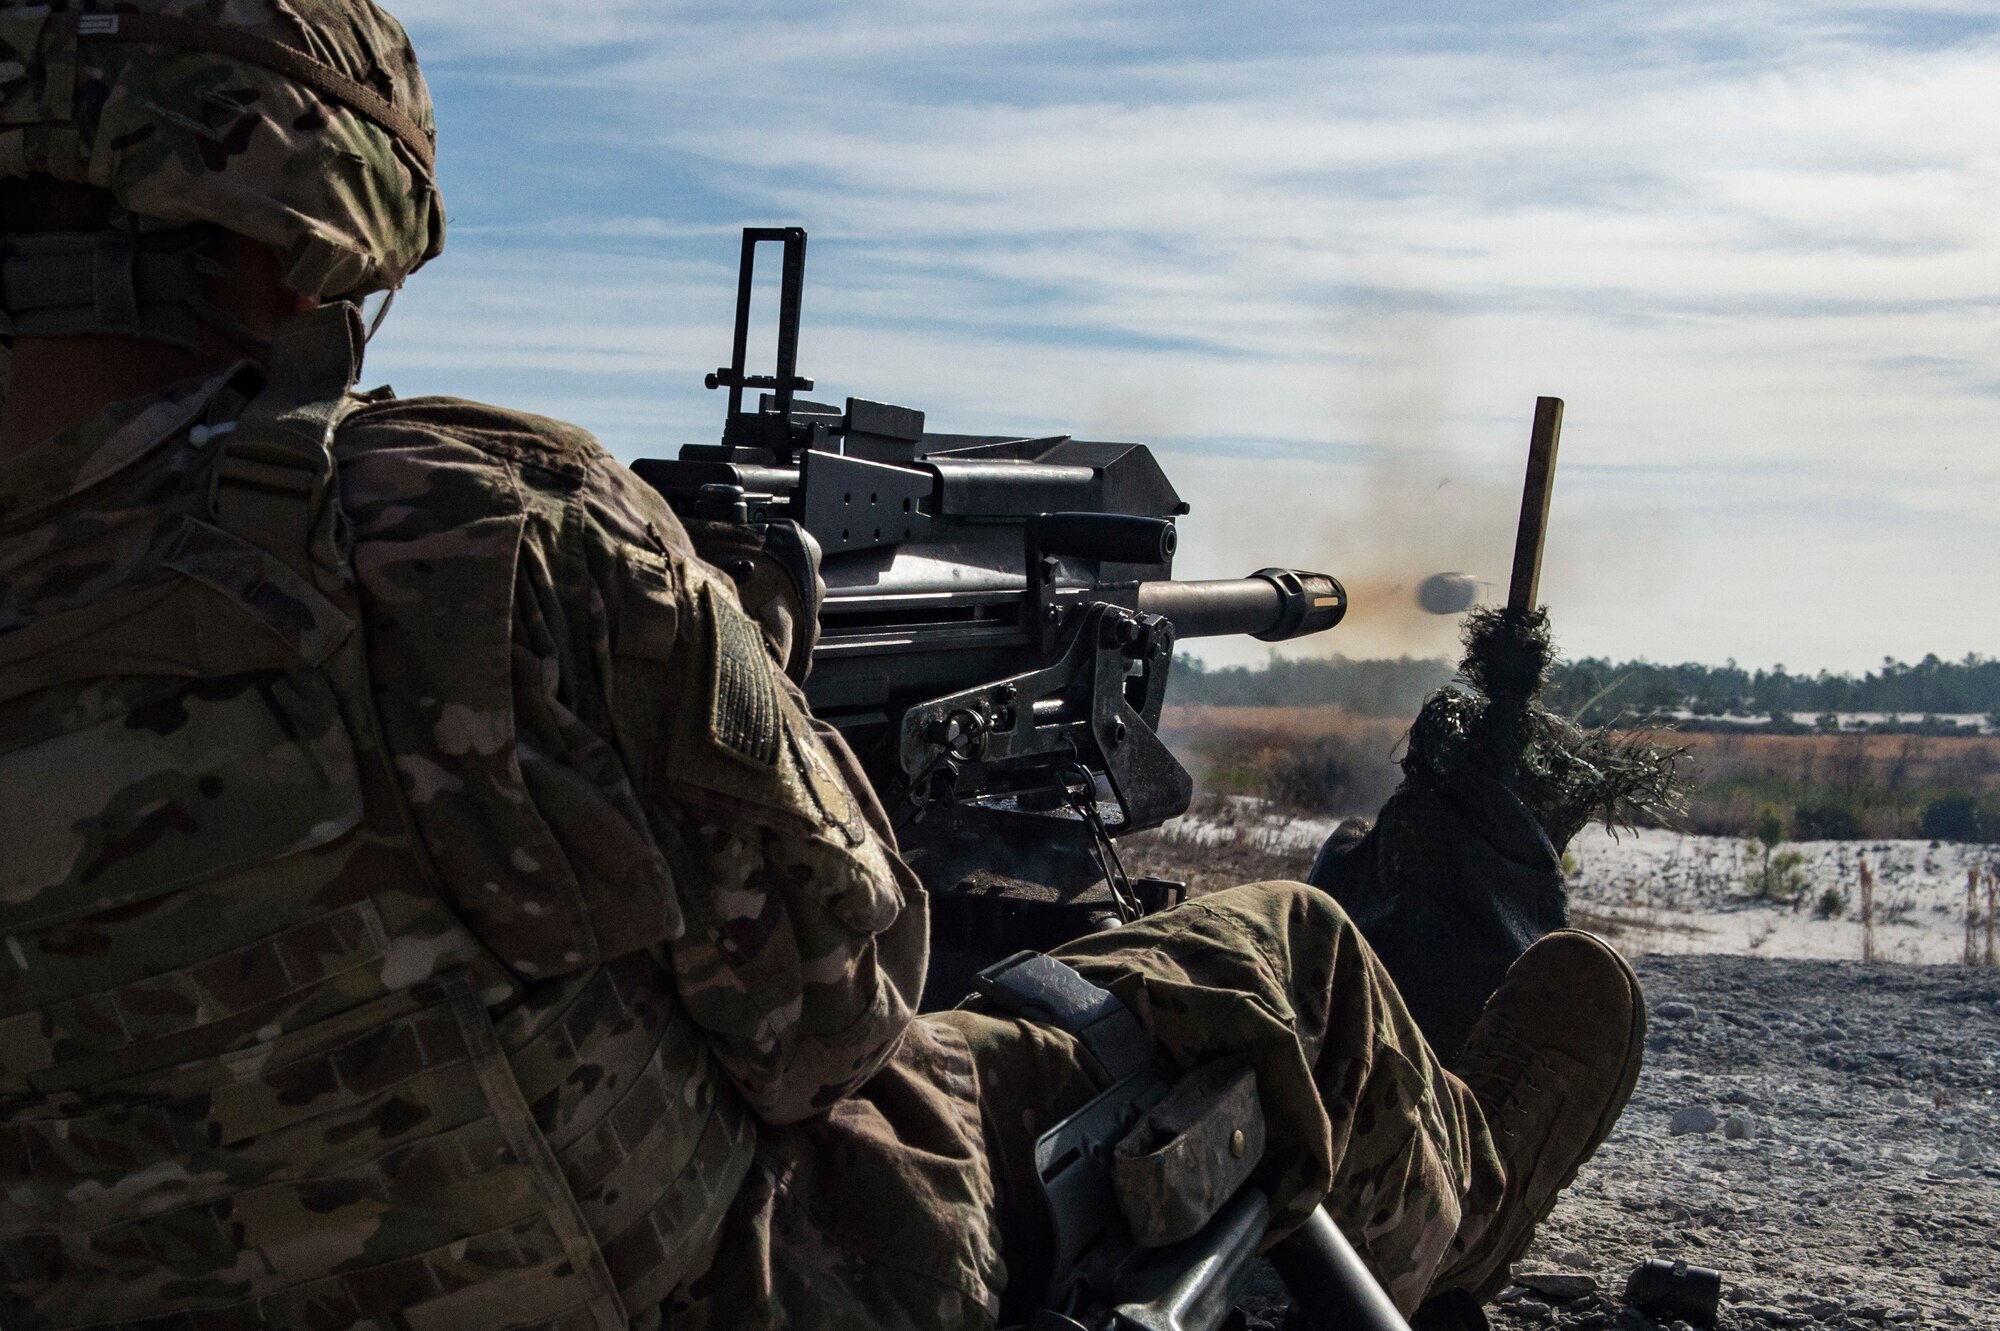 An Airman from the 824th Base Defense Squadron, fires a Mark 19 40mm grenade machine gun, Jan. 26, 2018, at Camp Blanding Joint Training Center, Fla. The Airmen traveled to Blanding to participate in Weapons Week where they qualified on heavy weapons ranging from the M249 light machine gun to the M18 Claymore mine. (U.S. Air Force photo by Senior Airman Janiqua P. Robinson)